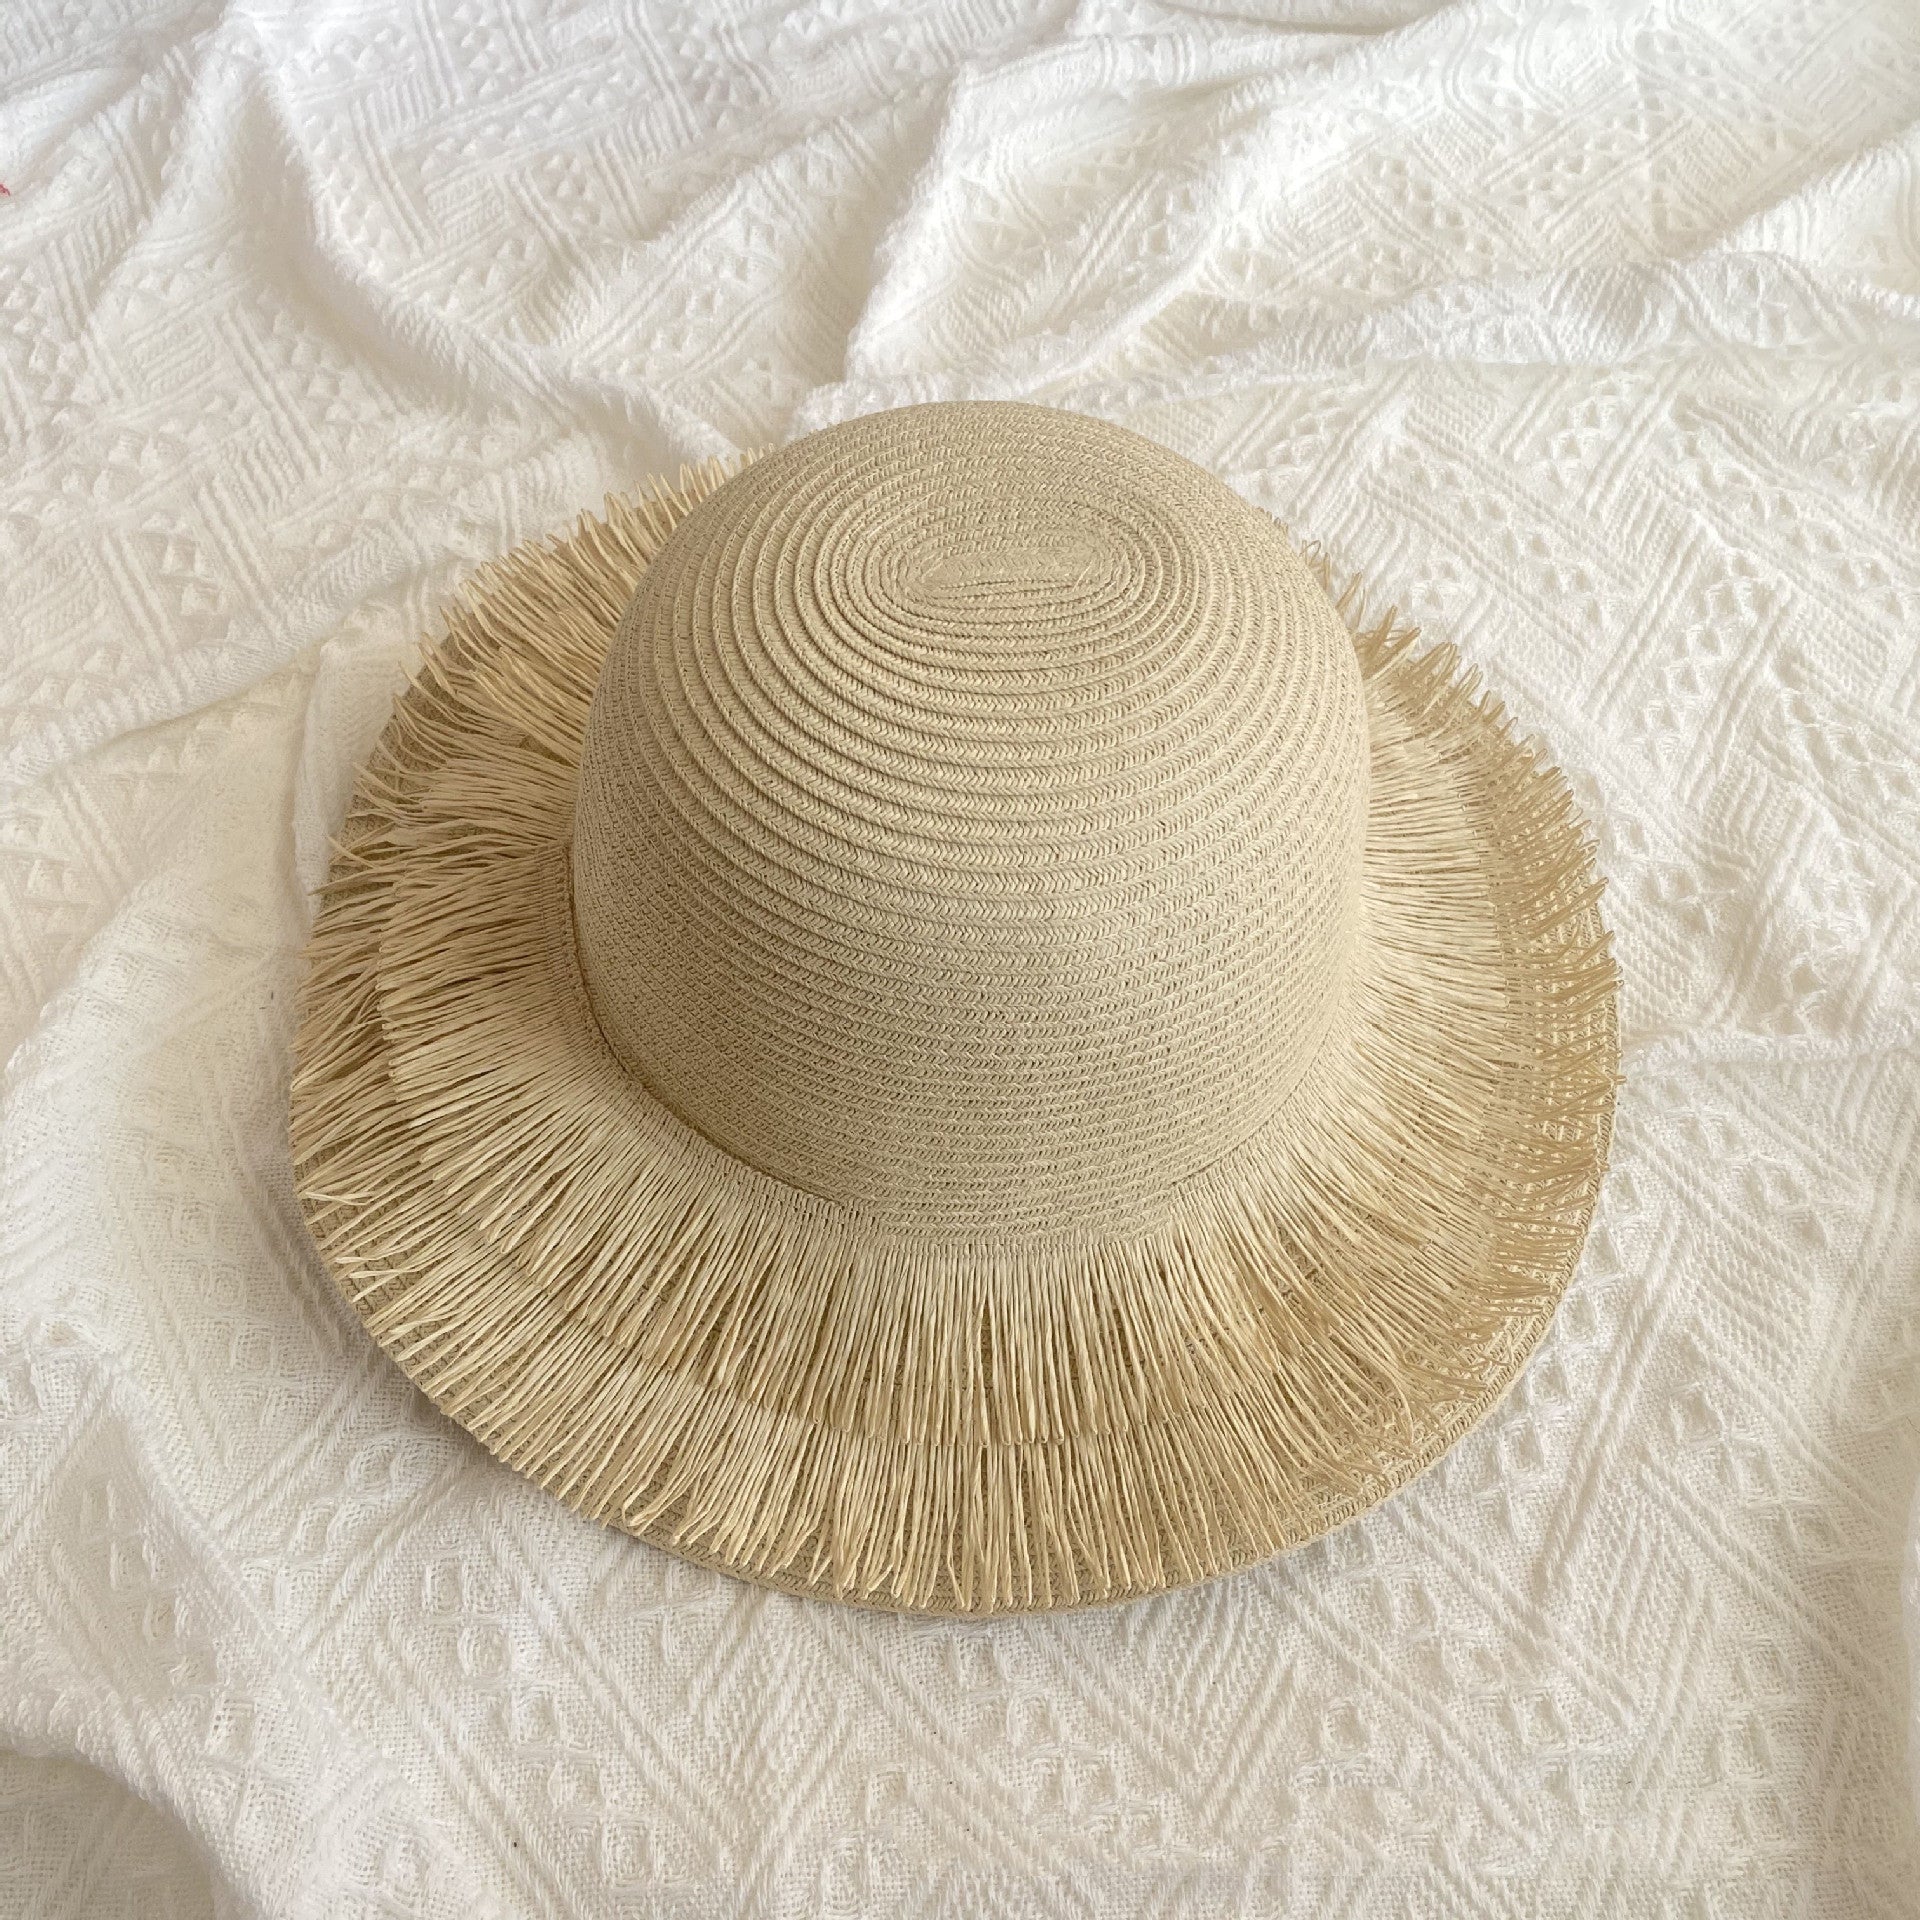 A Fringed Designed Seaside Beach Straw Hat by Beachy Cover Ups providing sun protection on a white bed.